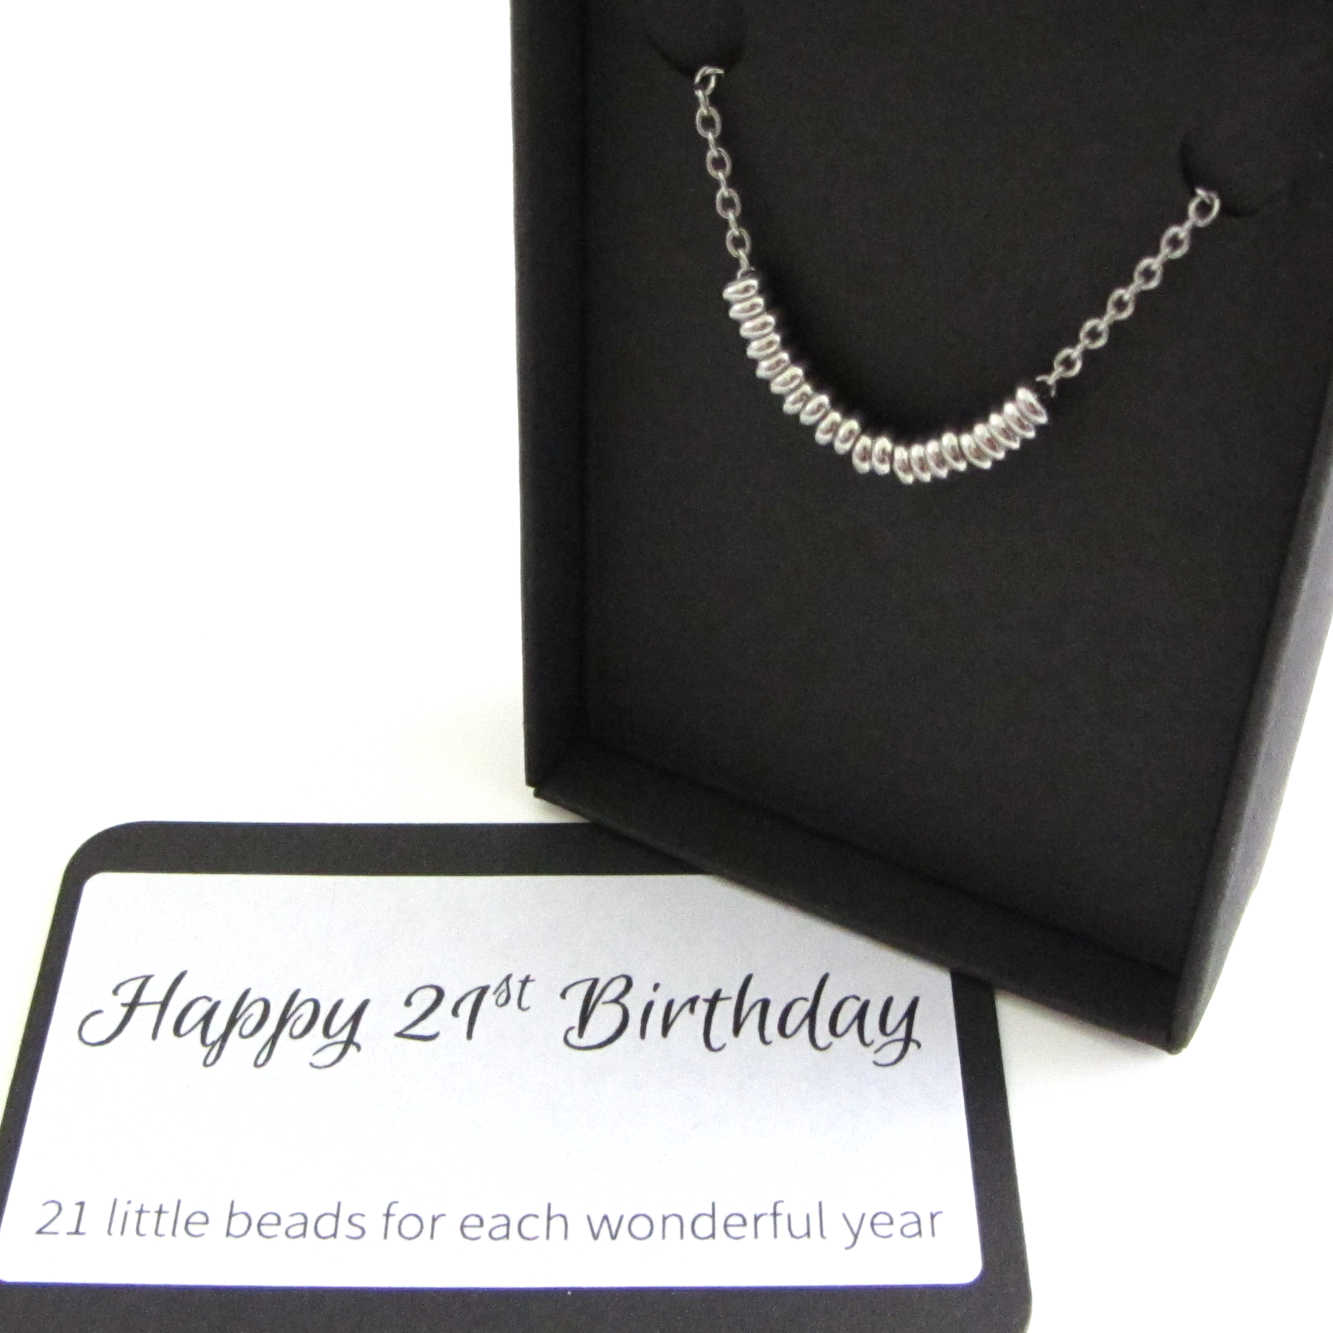 21 stainless steel beads one for each year necklace on a stainless steel chain shown in black gift box with happy 21st birthday message card